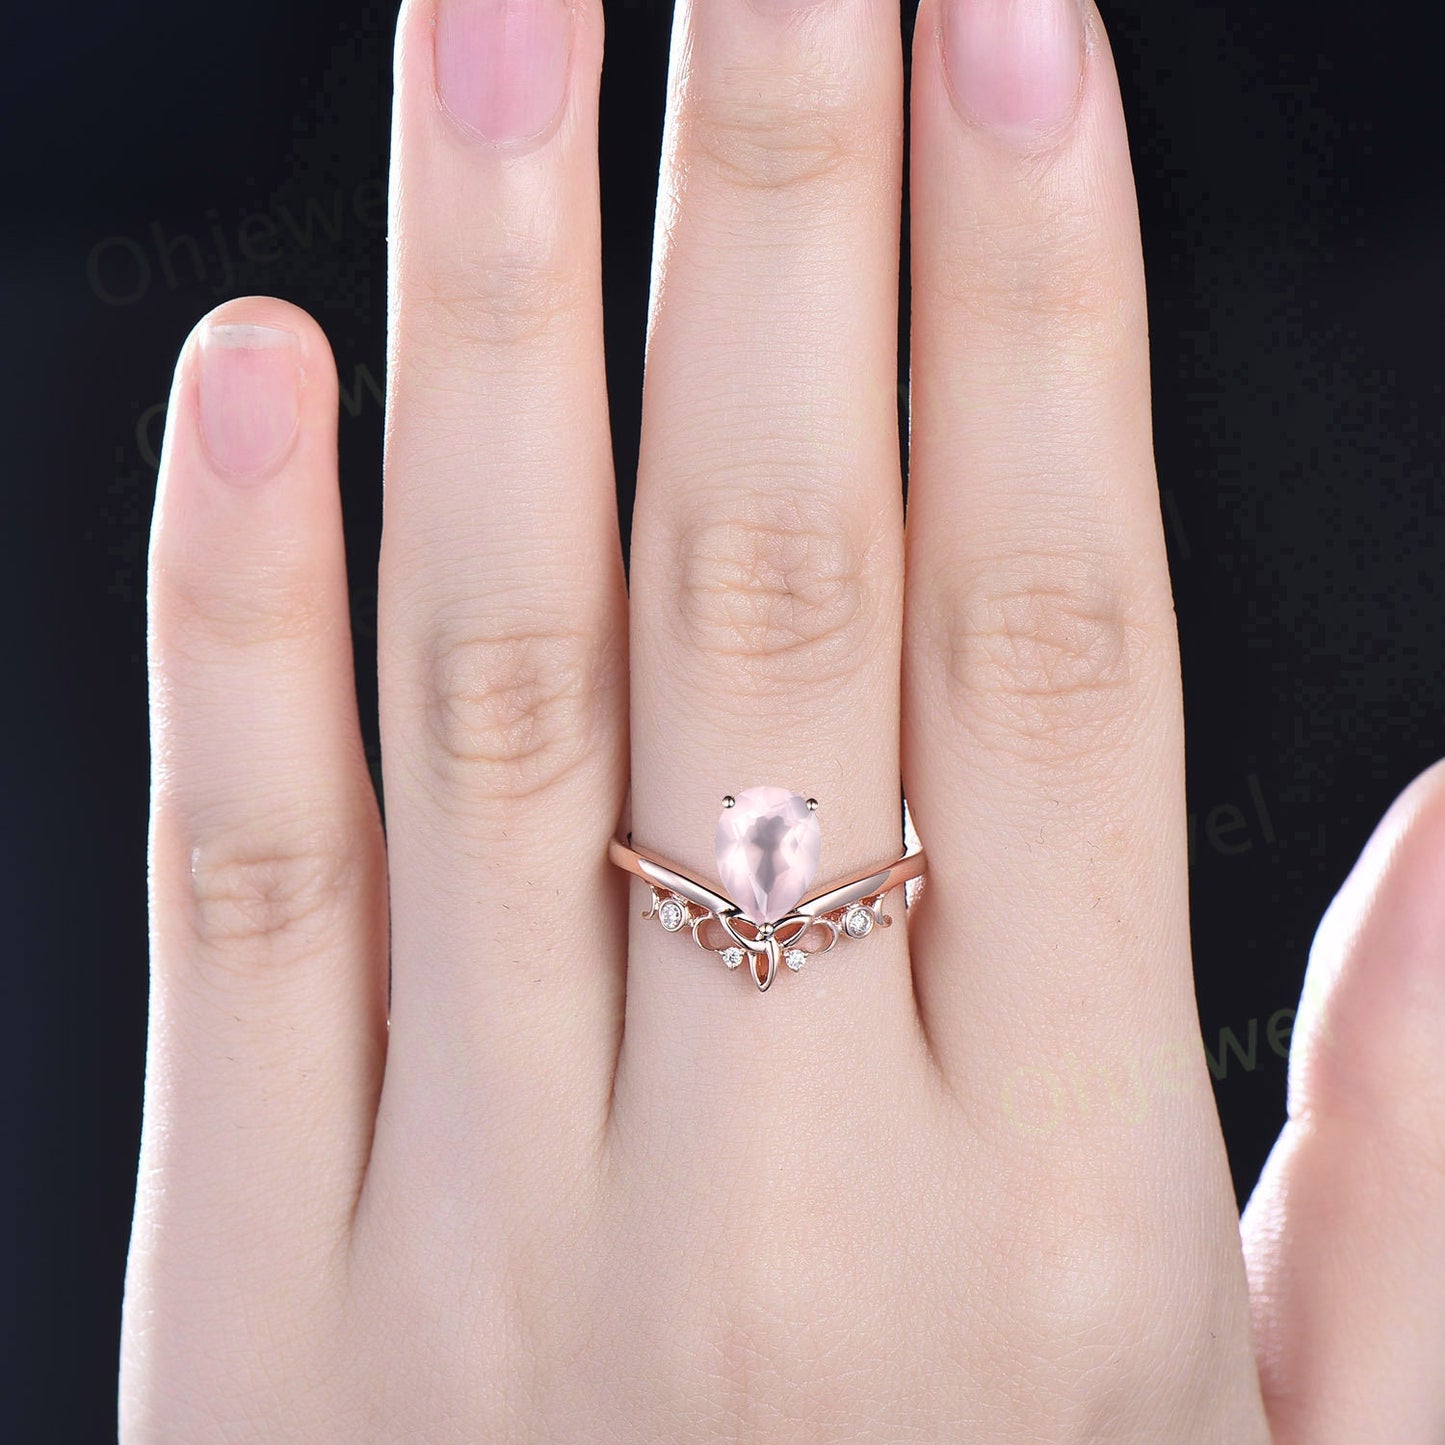 Pear shaped rose quartz ring rose gold unique engagement ring diamond women Personalized alternative moon vintage Norse Viking ring Jewelry